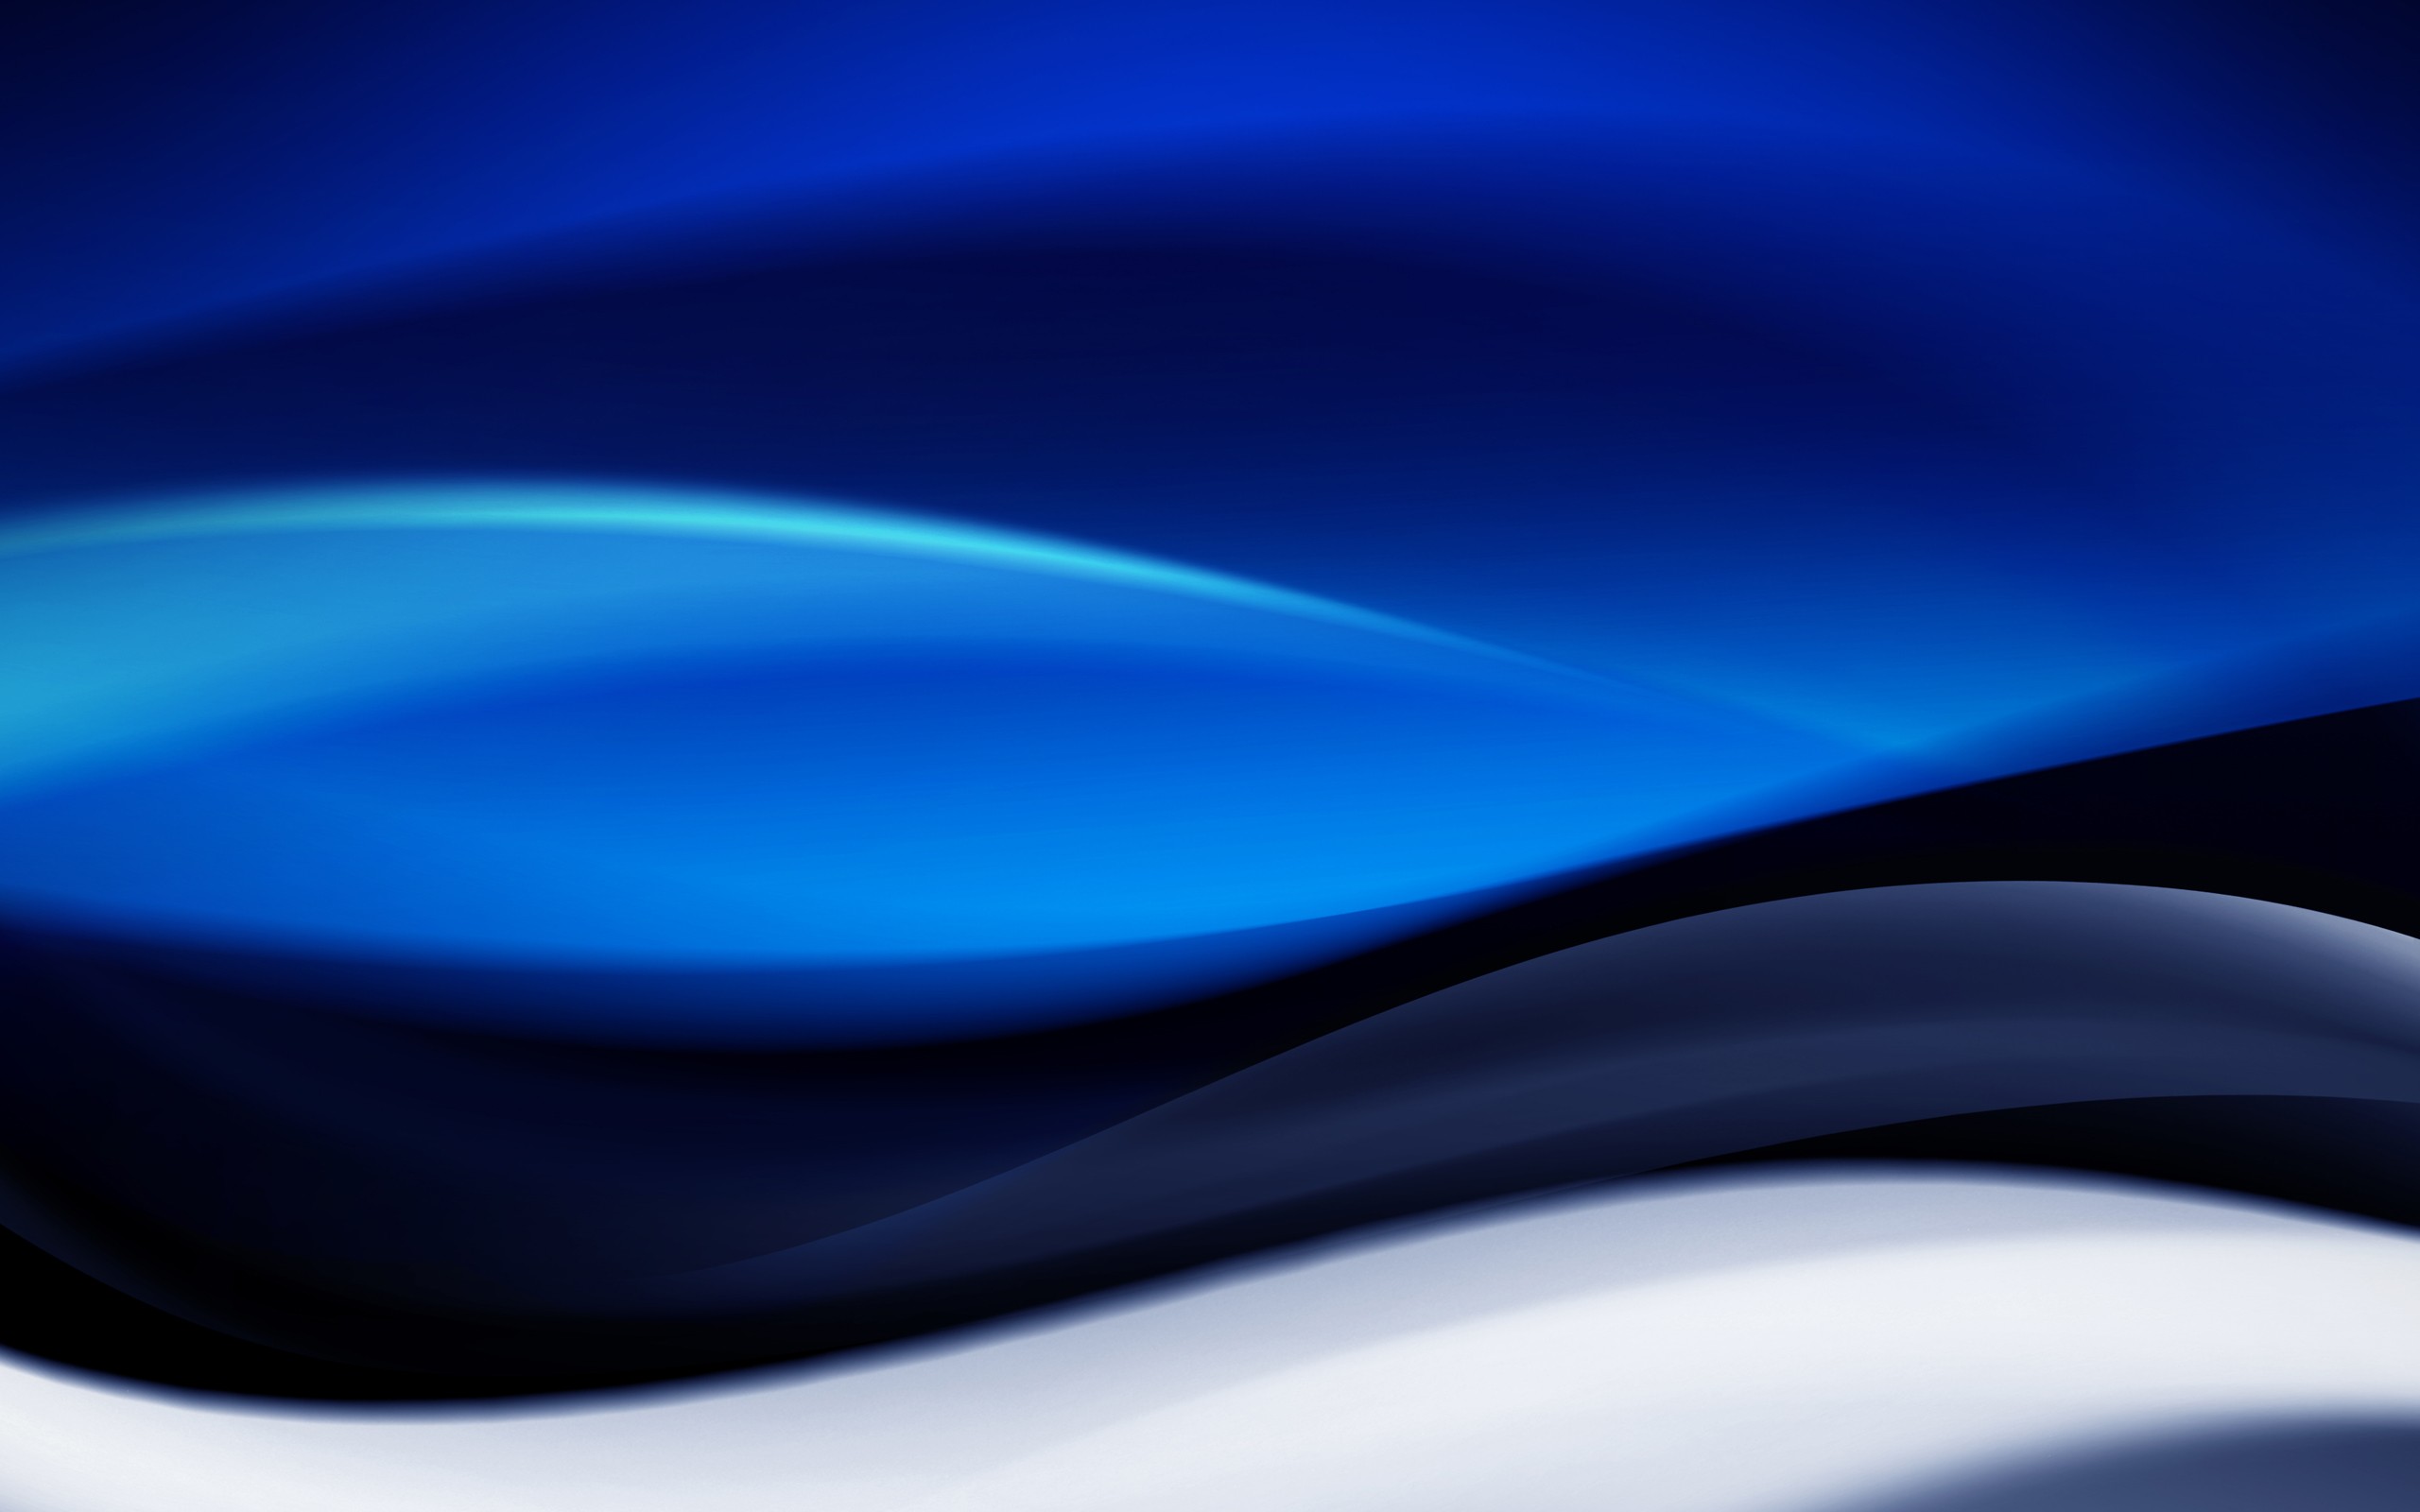 General 2560x1600 digital art abstract shapes blue background waveforms